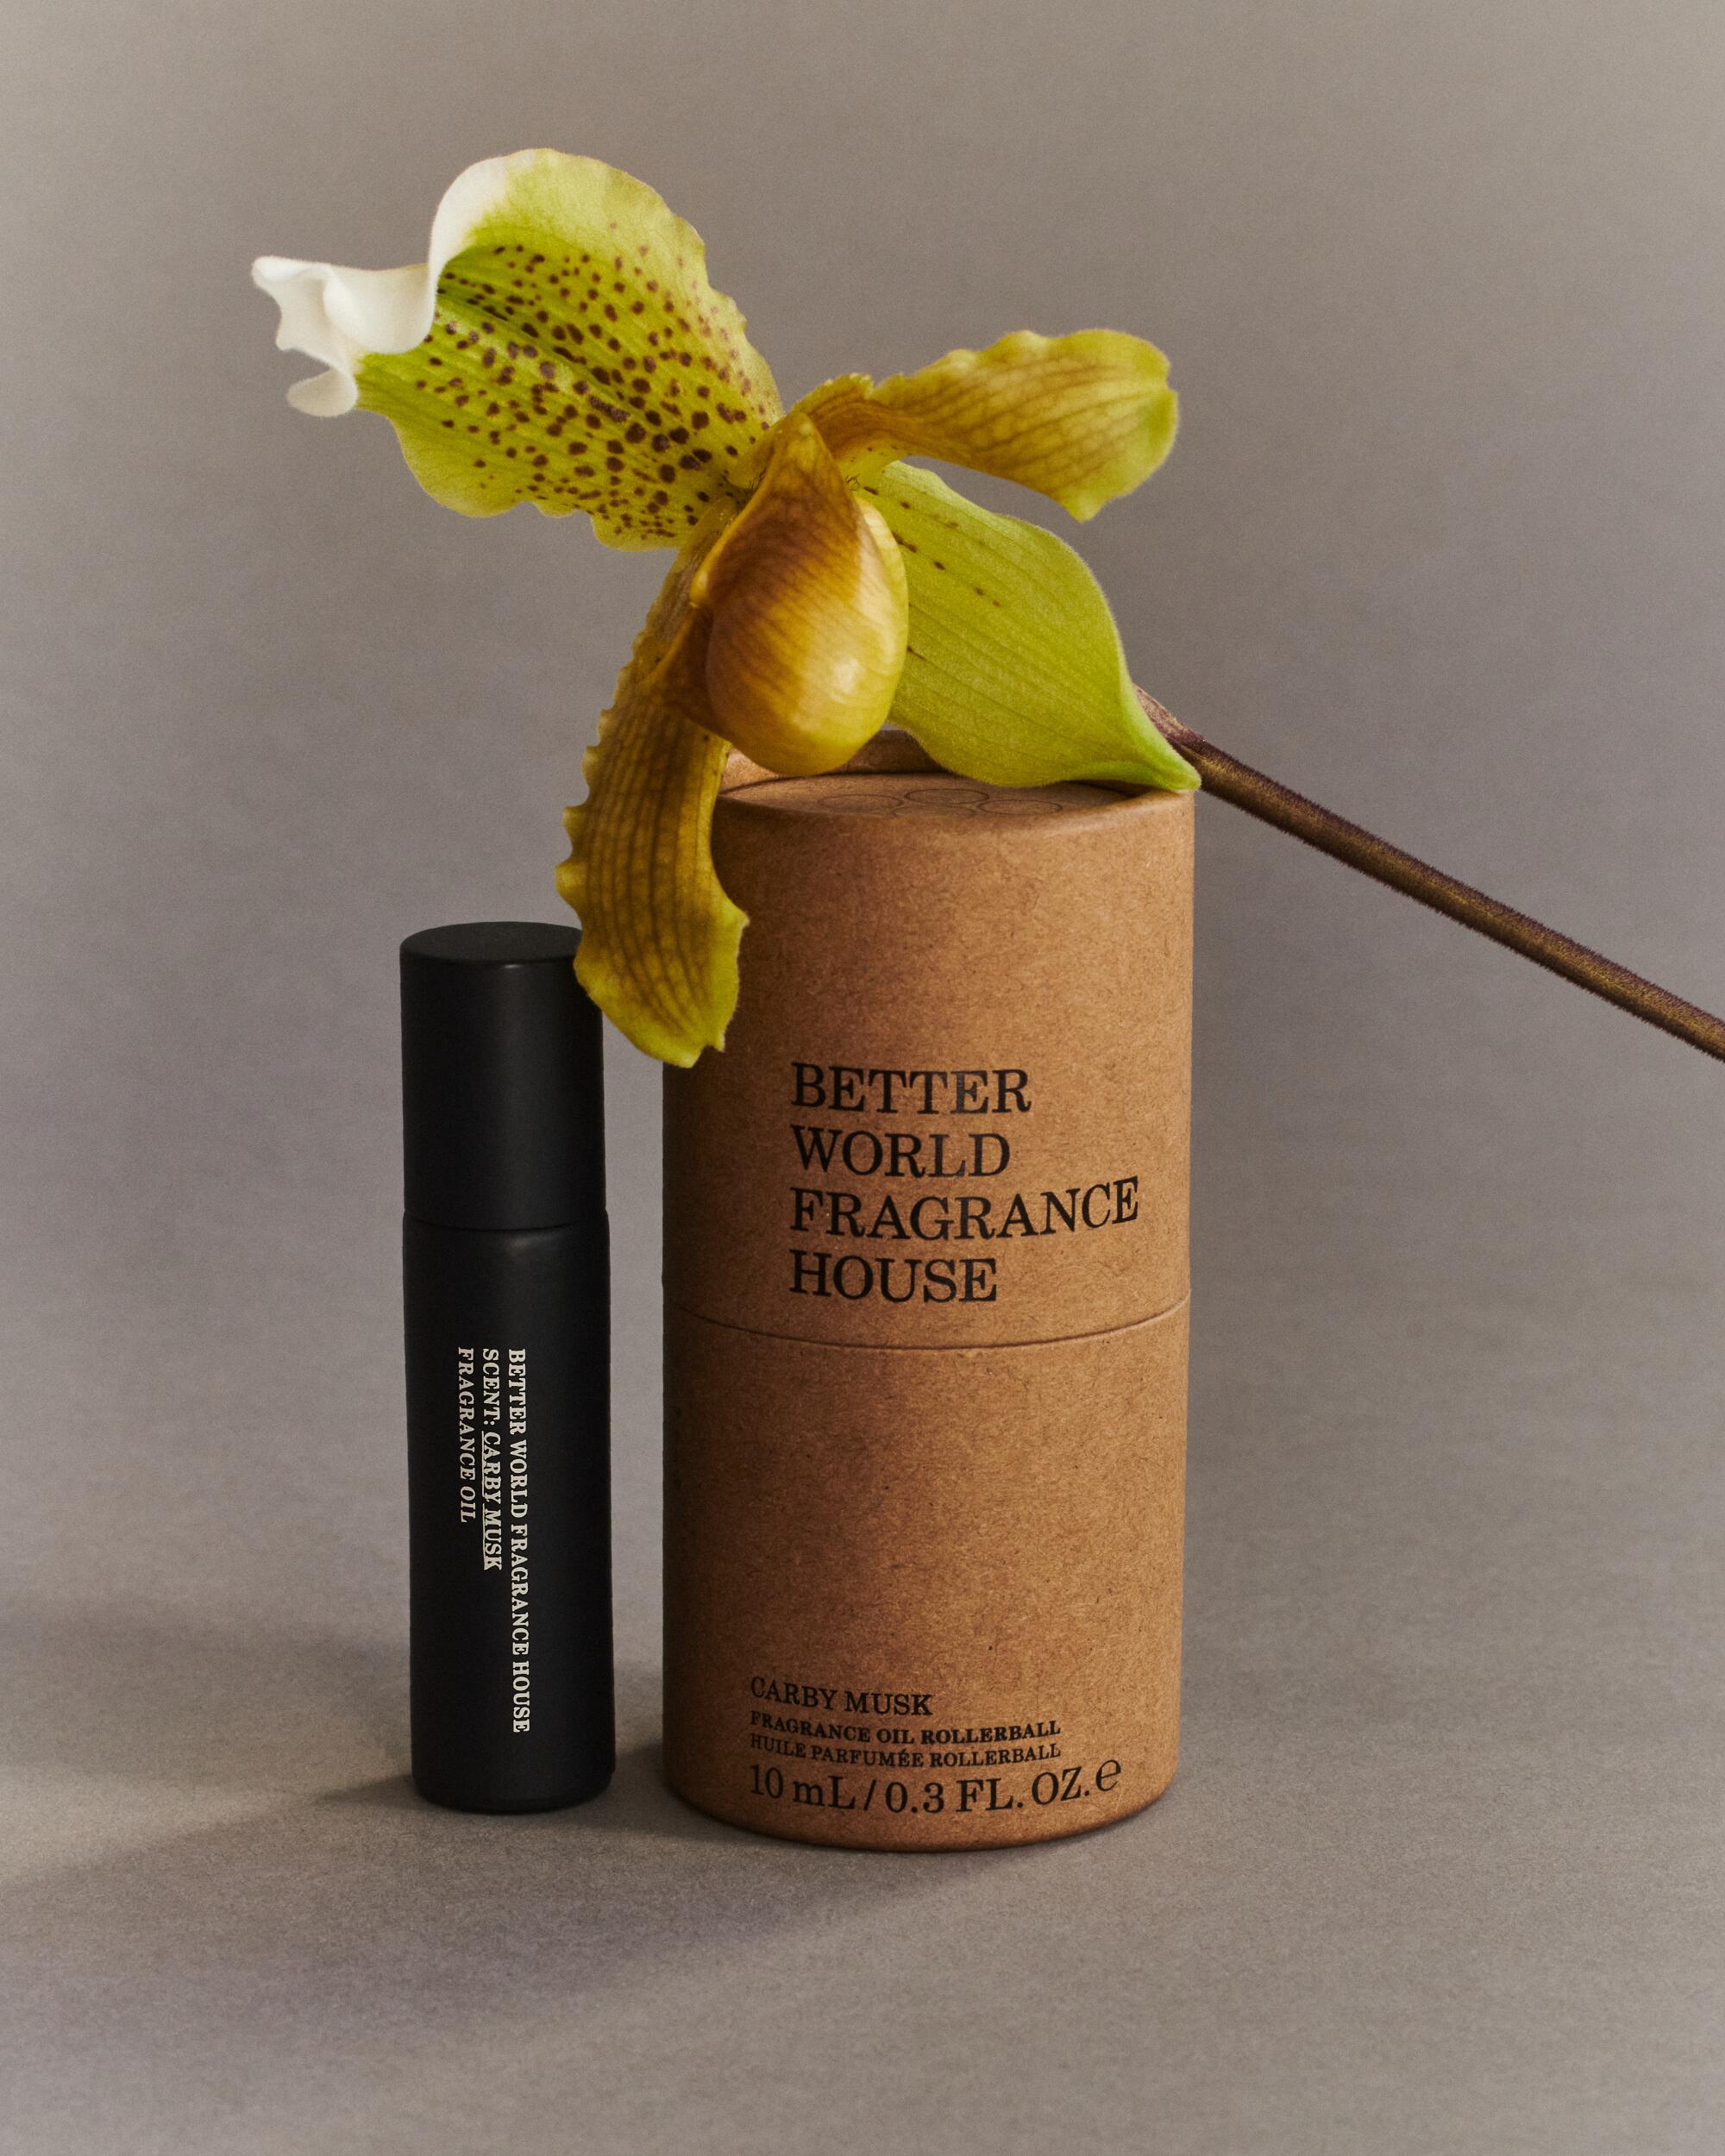 A bottle and case for Better World Fragrance House's Carby Musk.